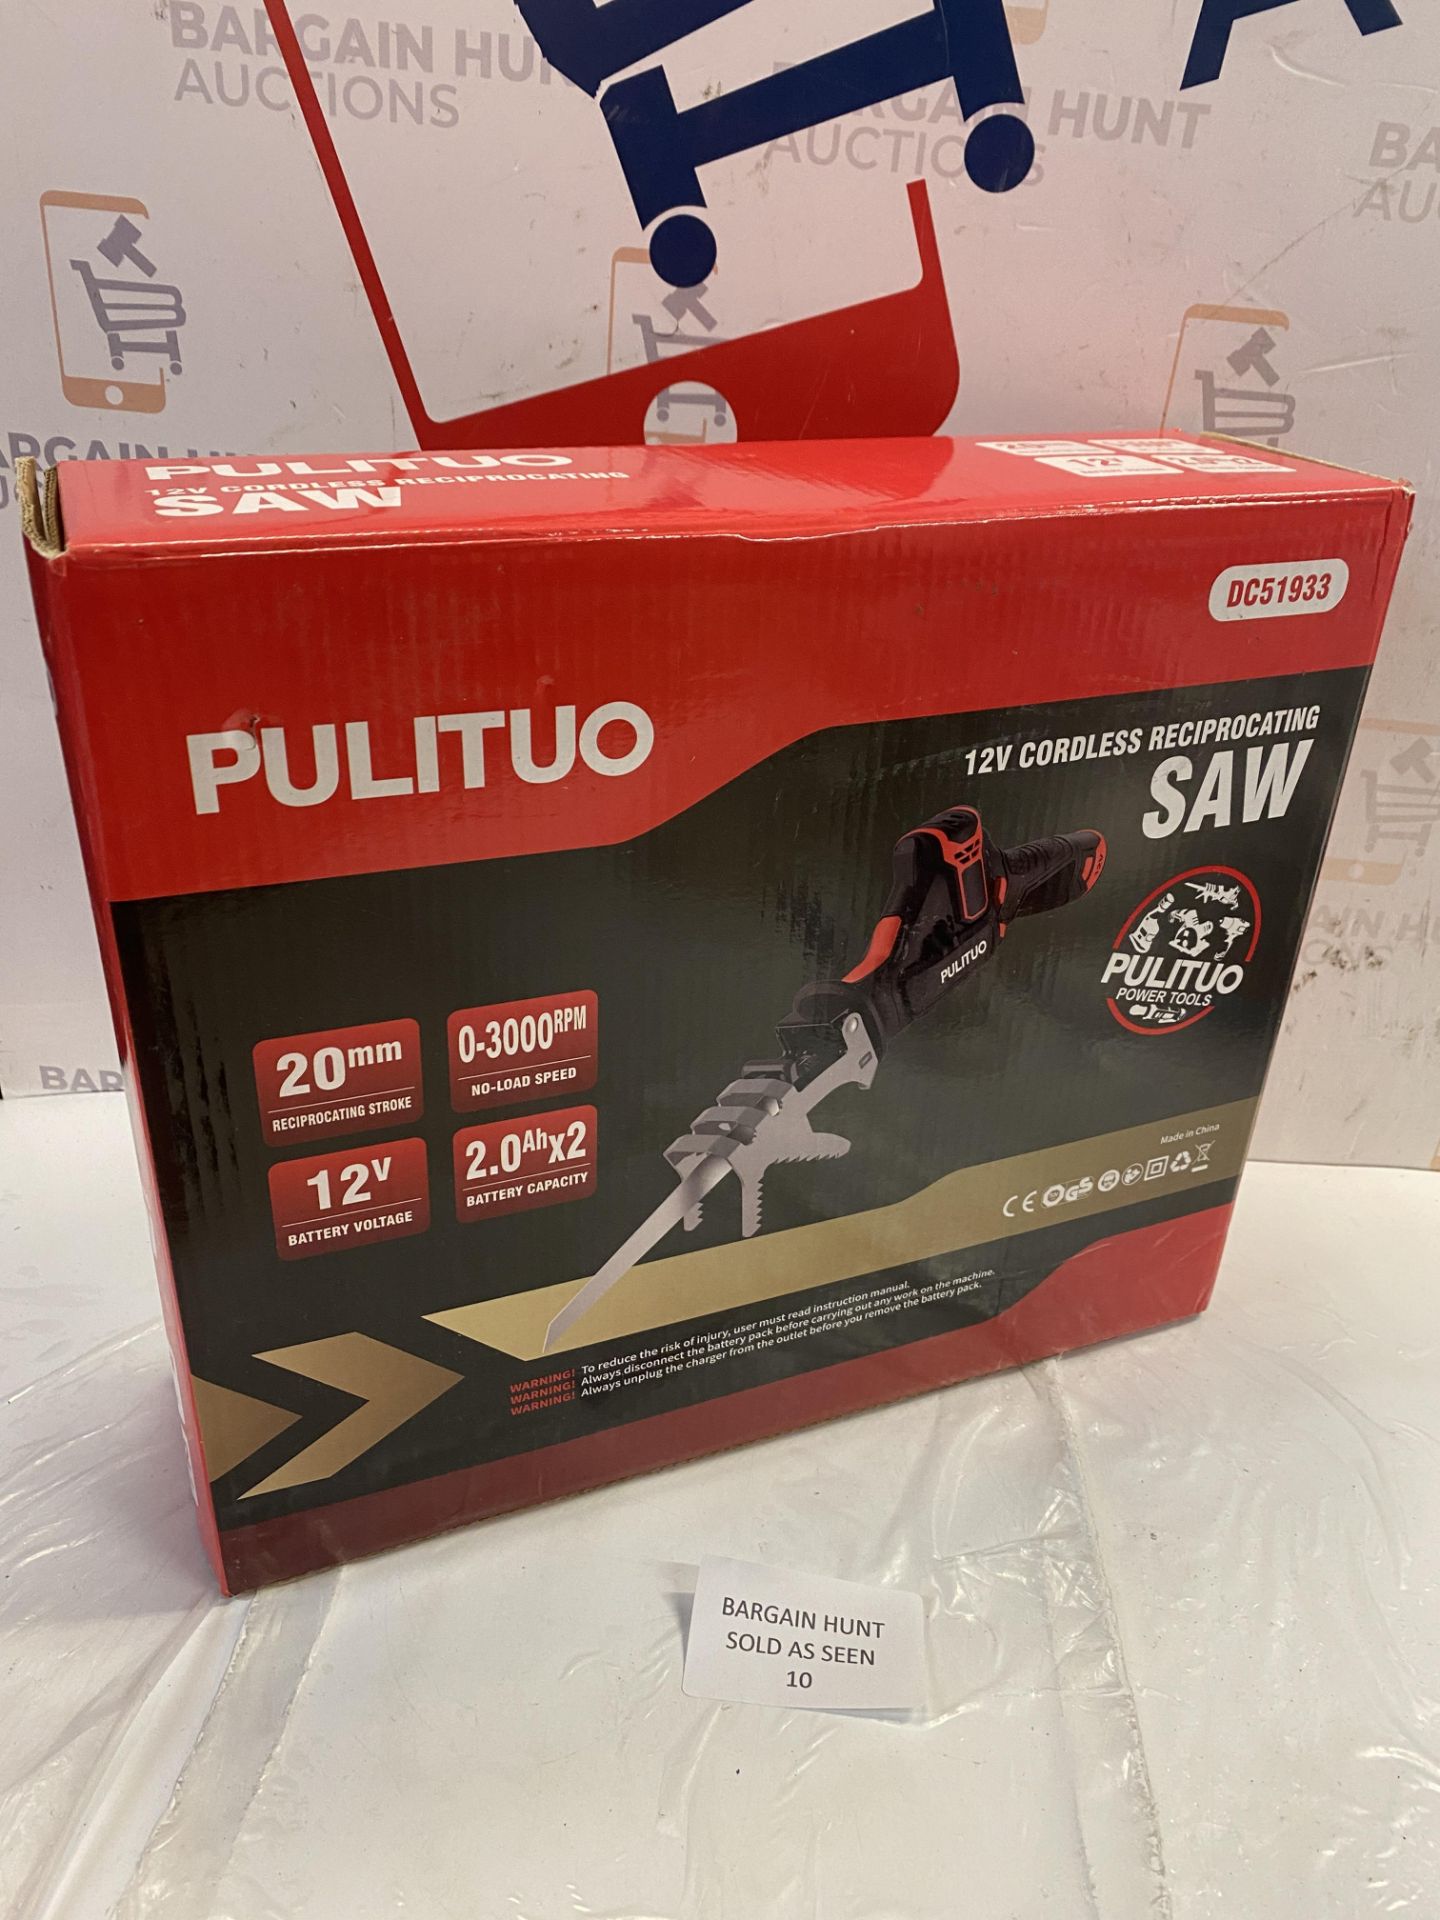 RRP £65.99 PULITUO Reciprocating Saw,Cordless Saw with Clamping Jaw,2x2000mAh Batteries,0-3000RPM - Image 2 of 2